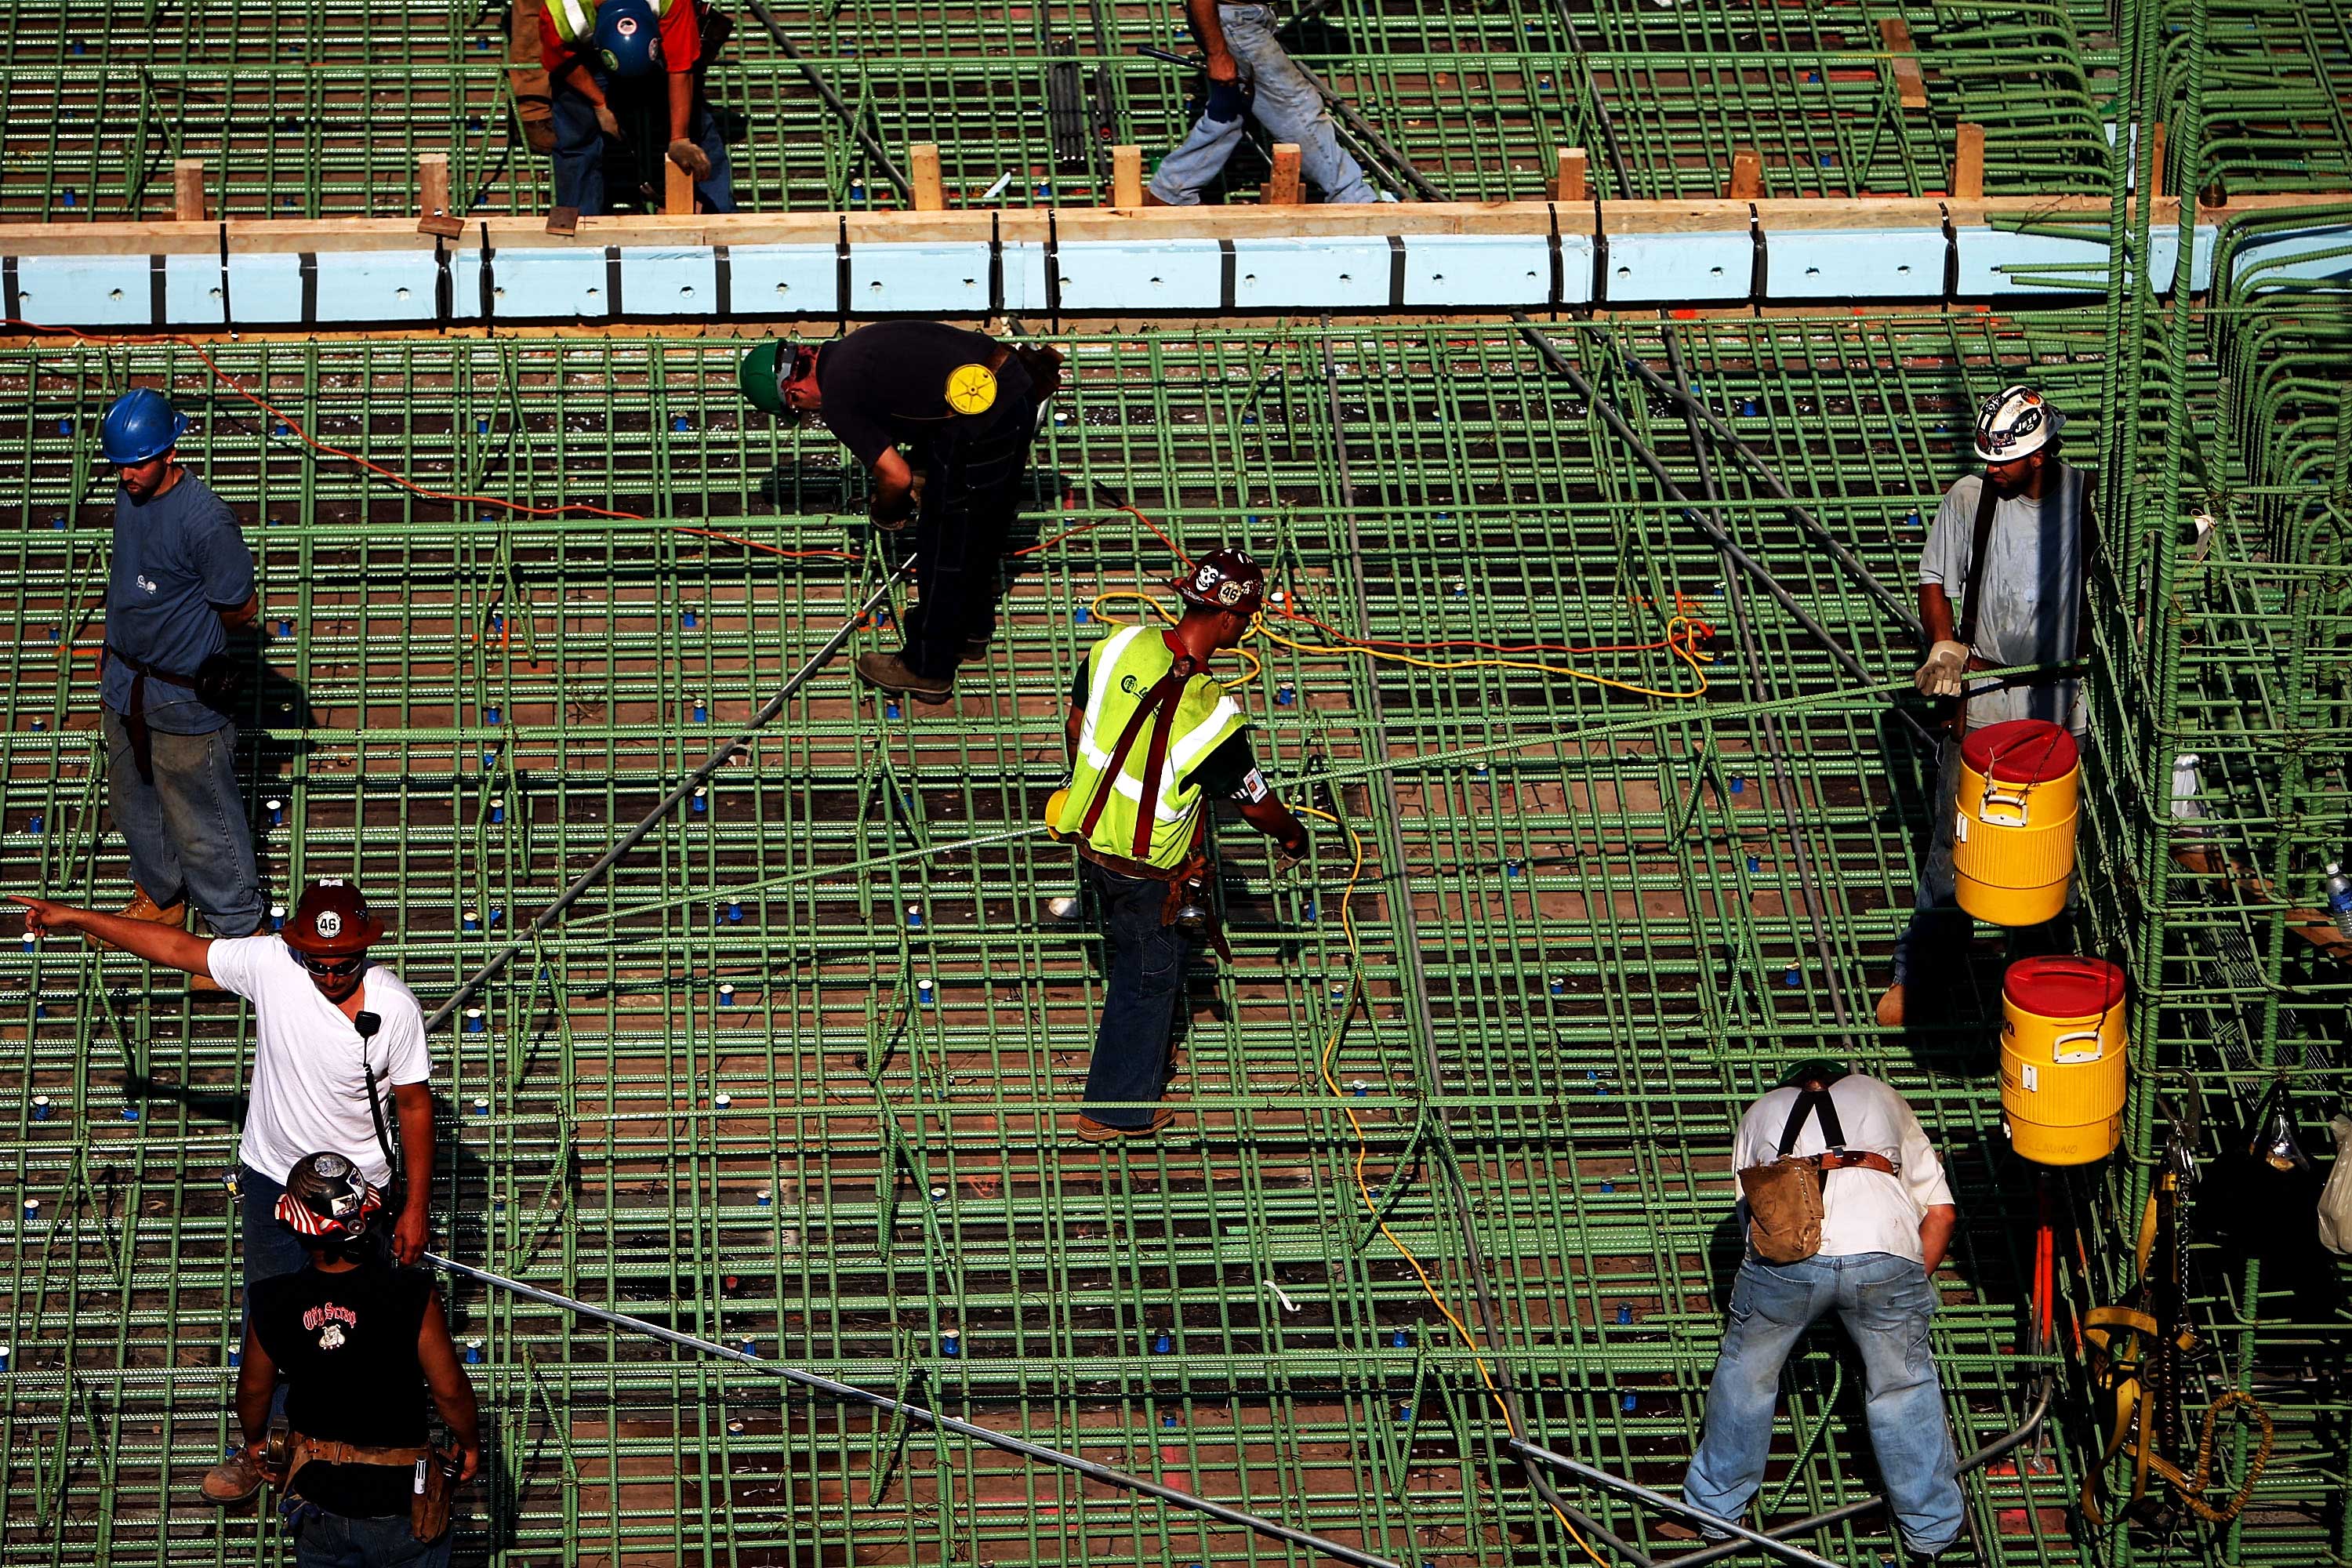 An image of construction workers